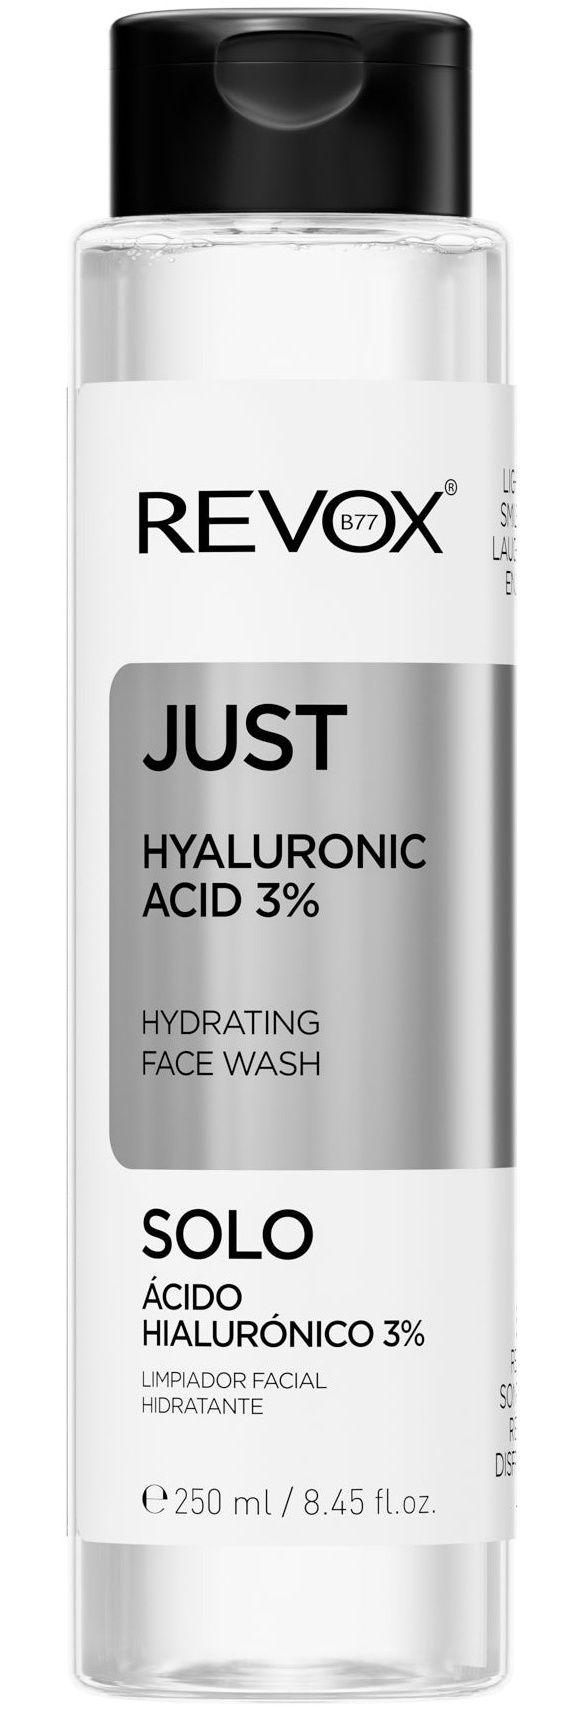 Revox Just Hyaluronic Acid 3% Hydrating Face Wash